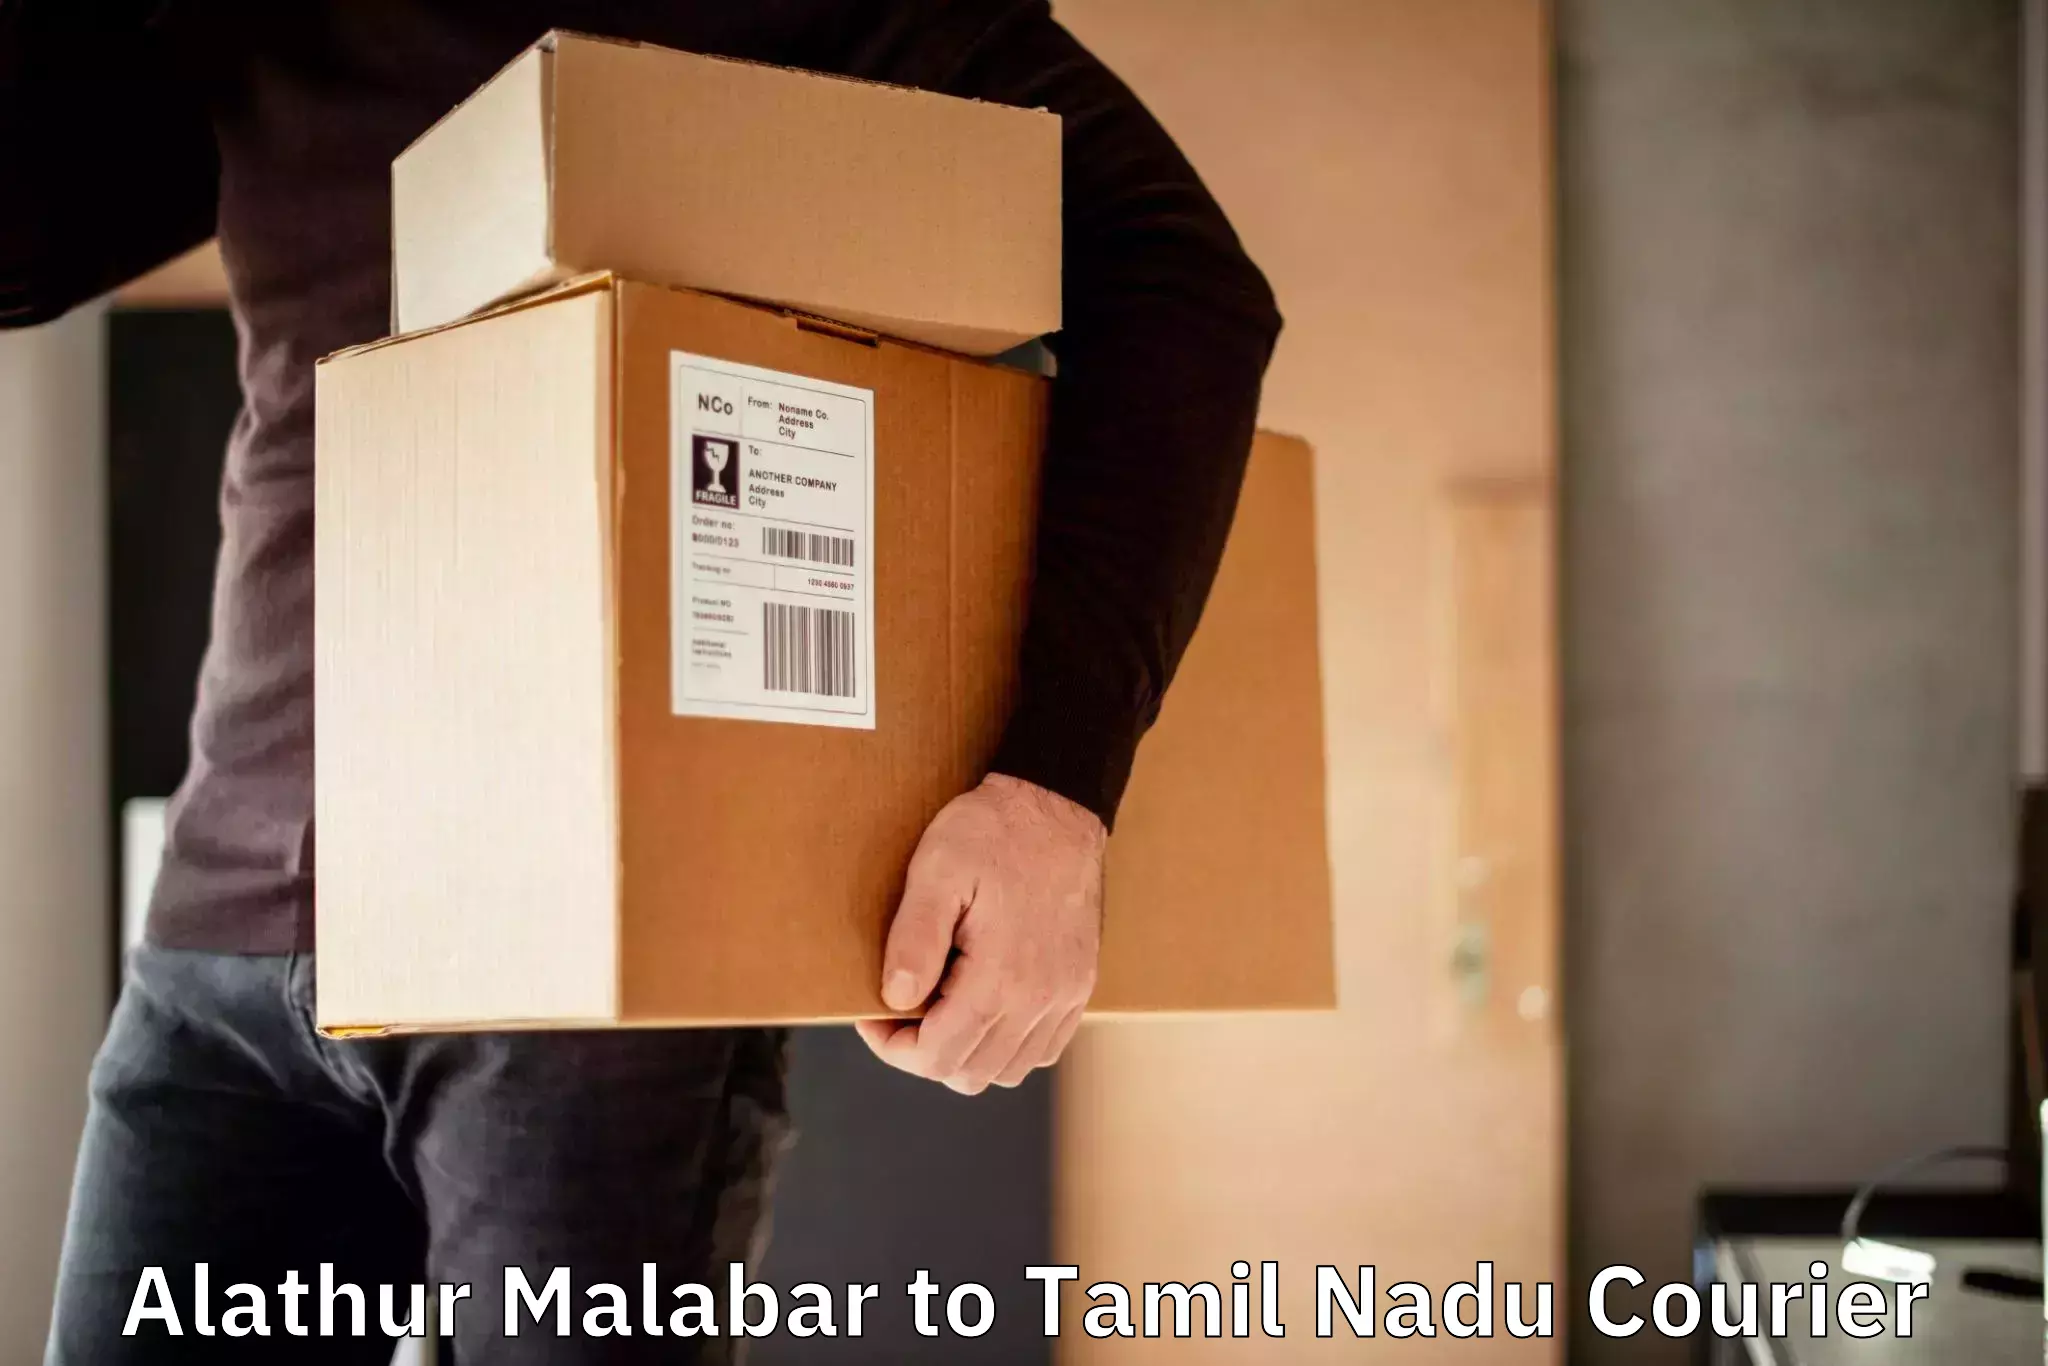 Courier service booking in Alathur Malabar to Palacode